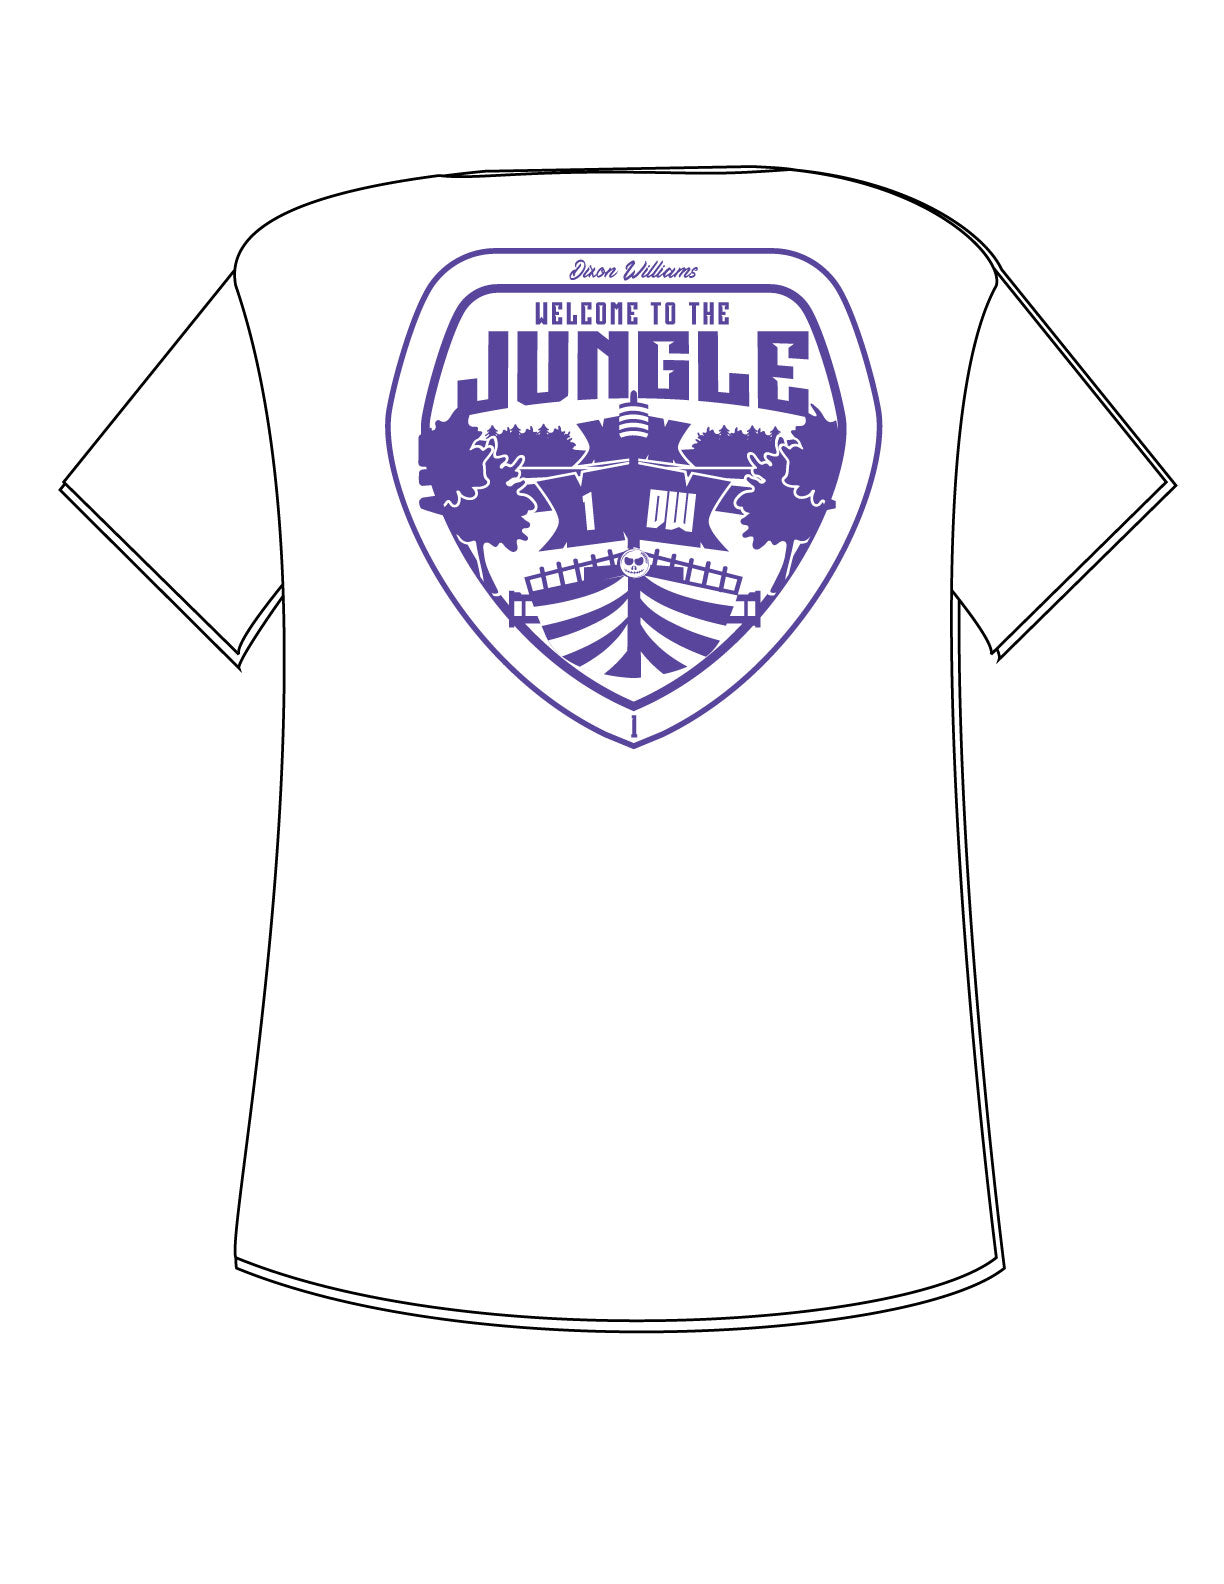 Dixon Williams "Welcome To The Jungle" NIL T-Shirt